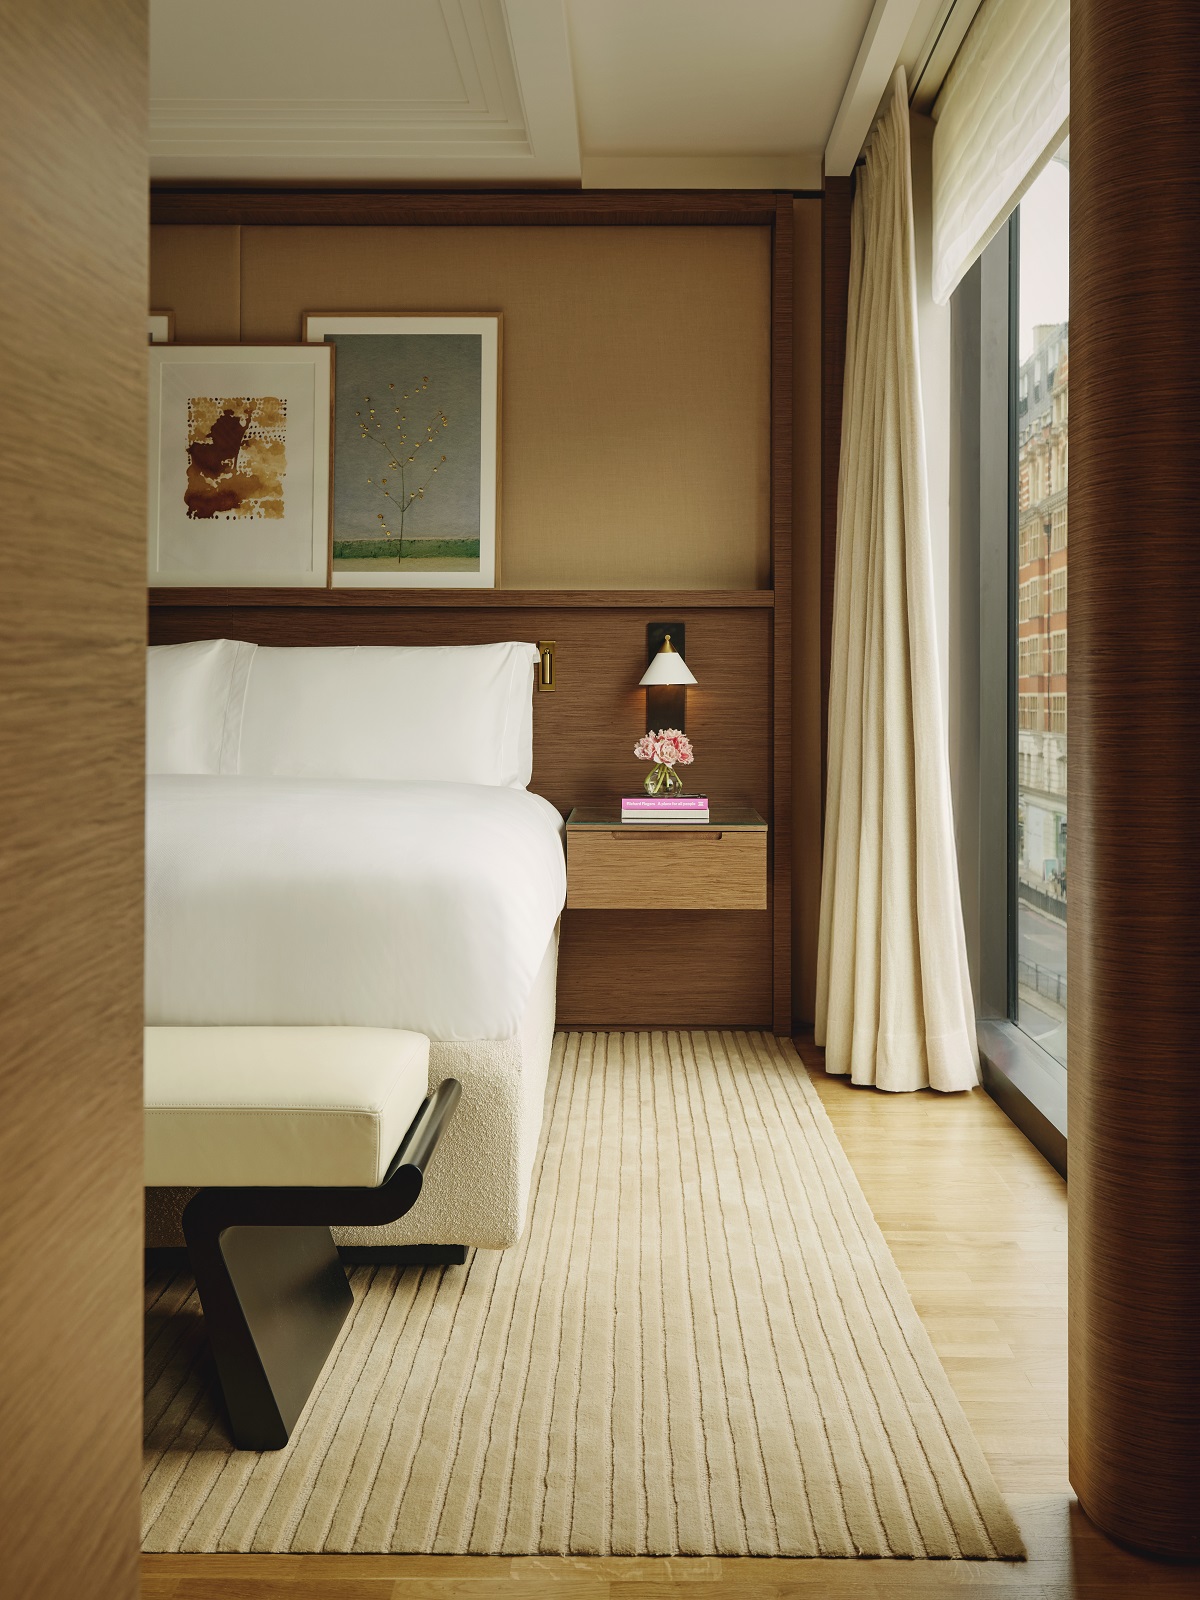 view framed by wooden door frame into the bedroom designed by Pierre-Yves Rochon